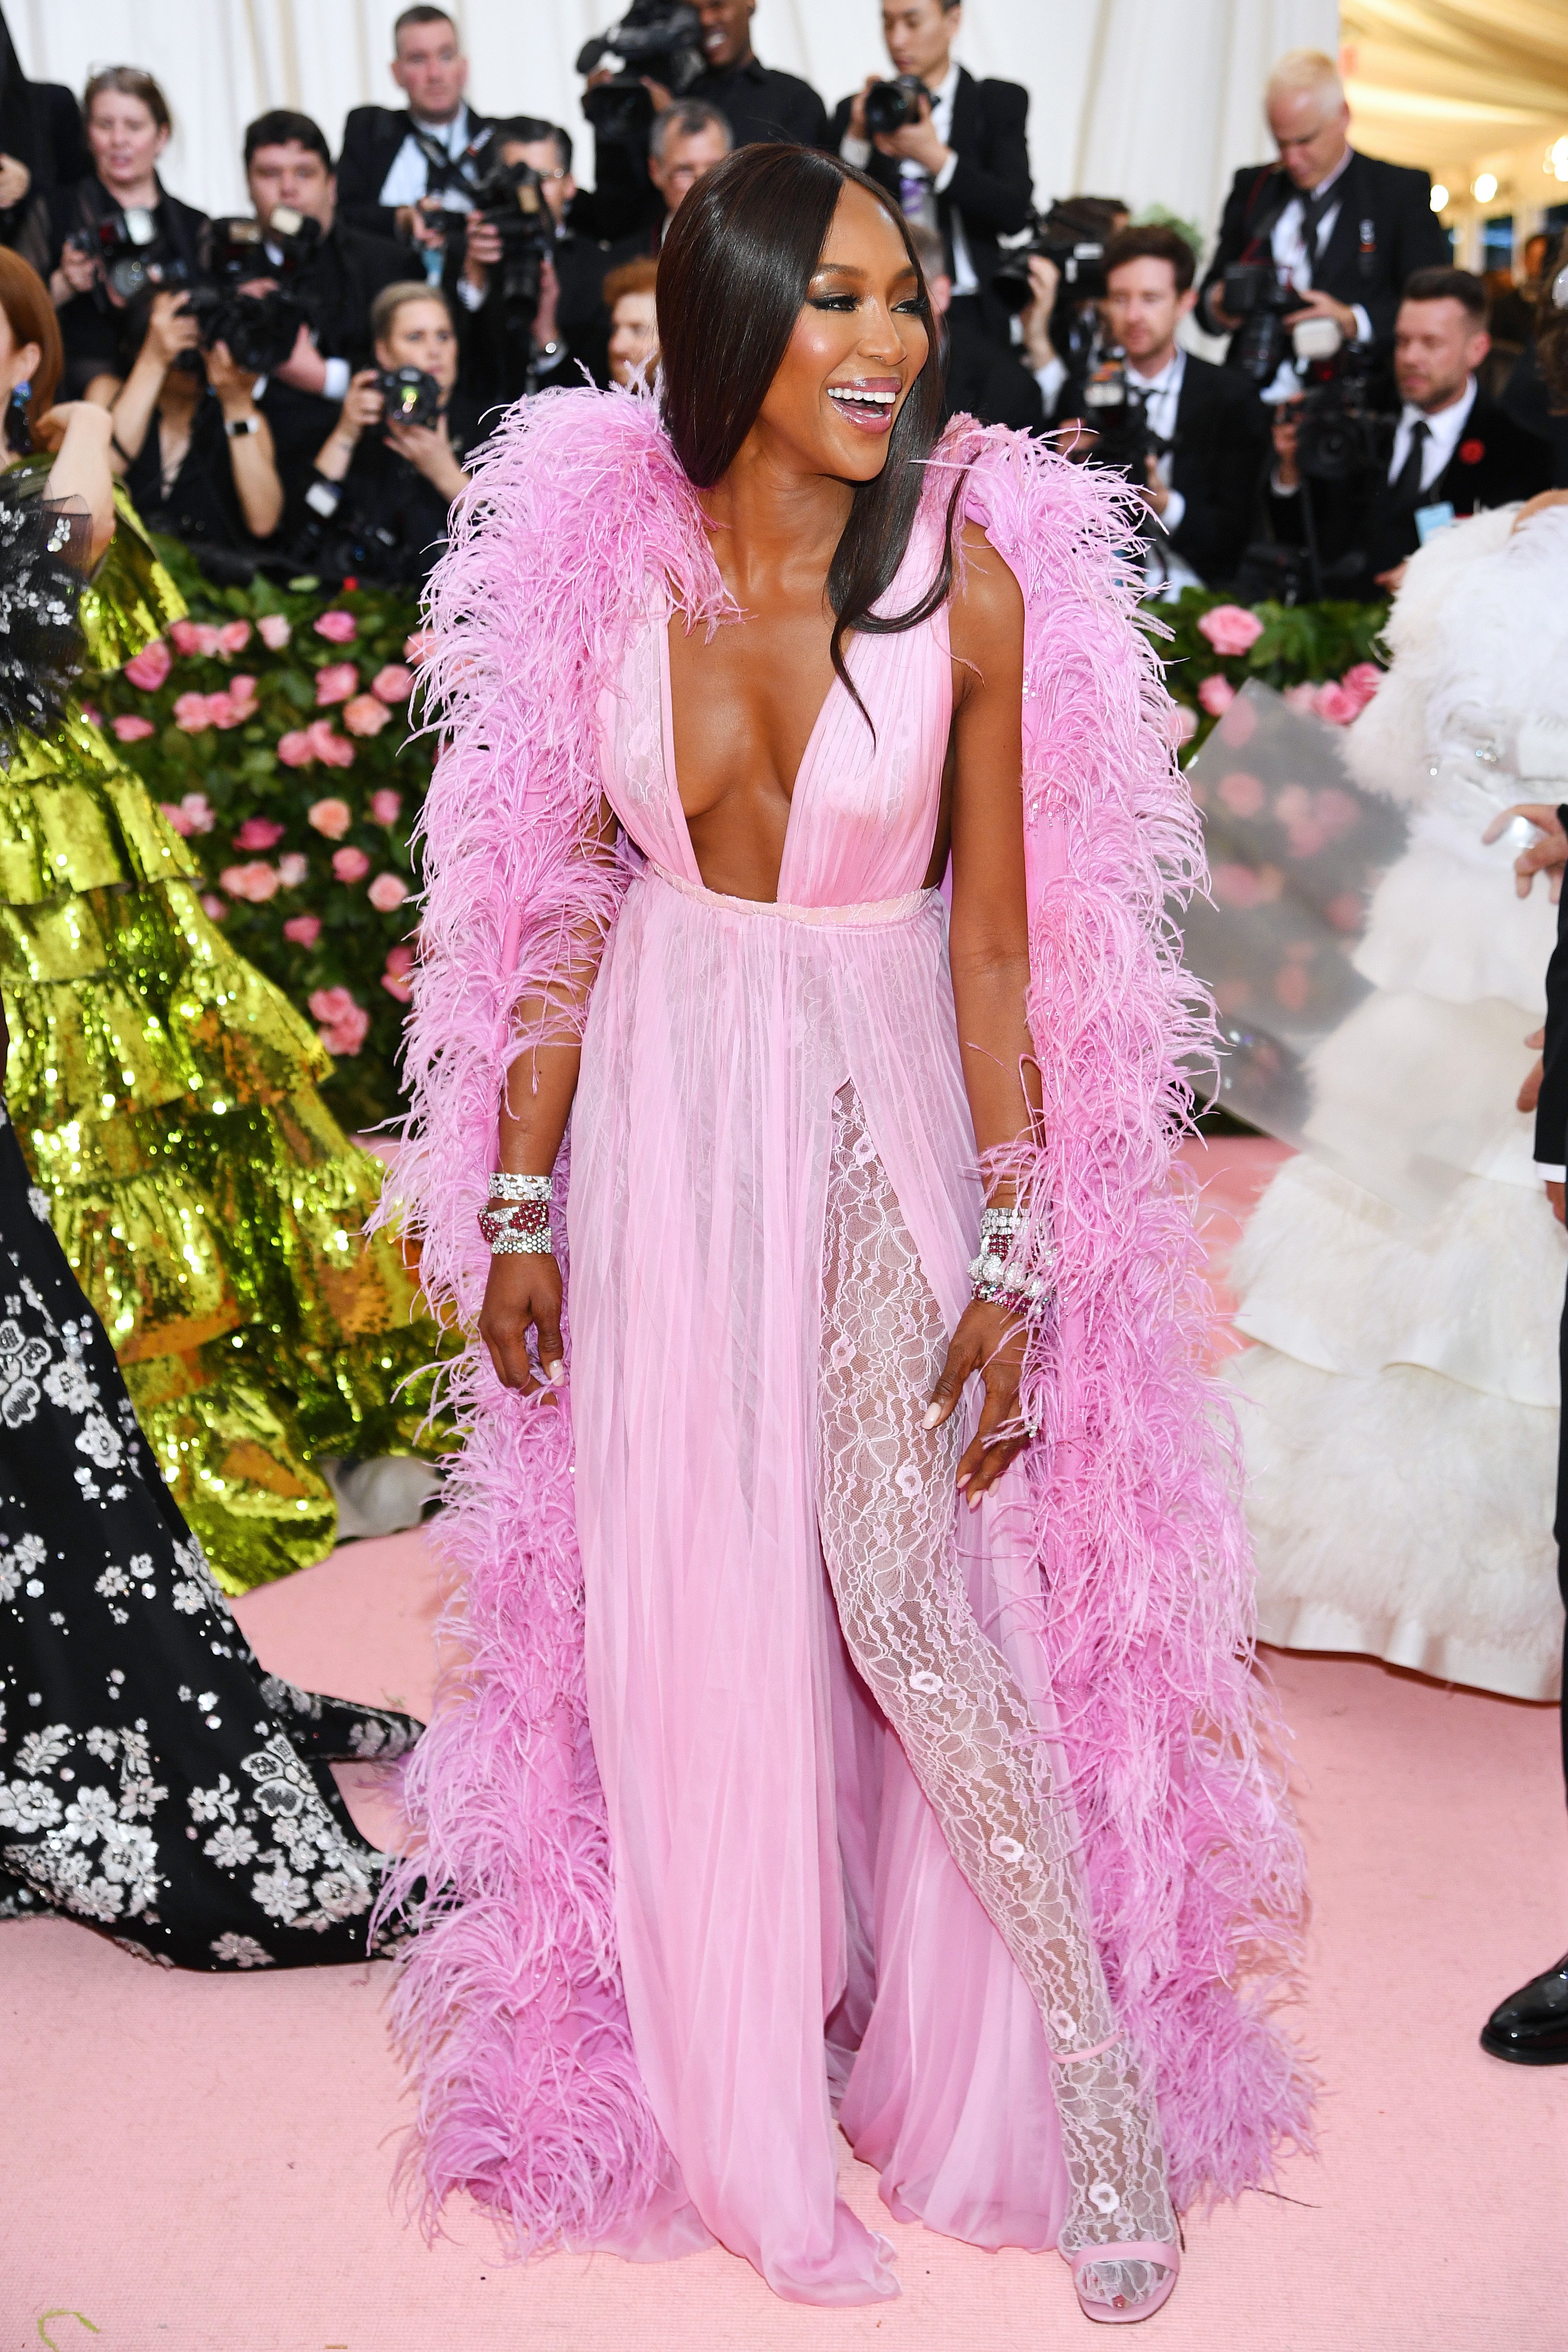 Naomi Campbell attends the 2019 Met Gala at Metropolitan Museum of Art on May 6, 2019 in New York City | Source: Getty Images